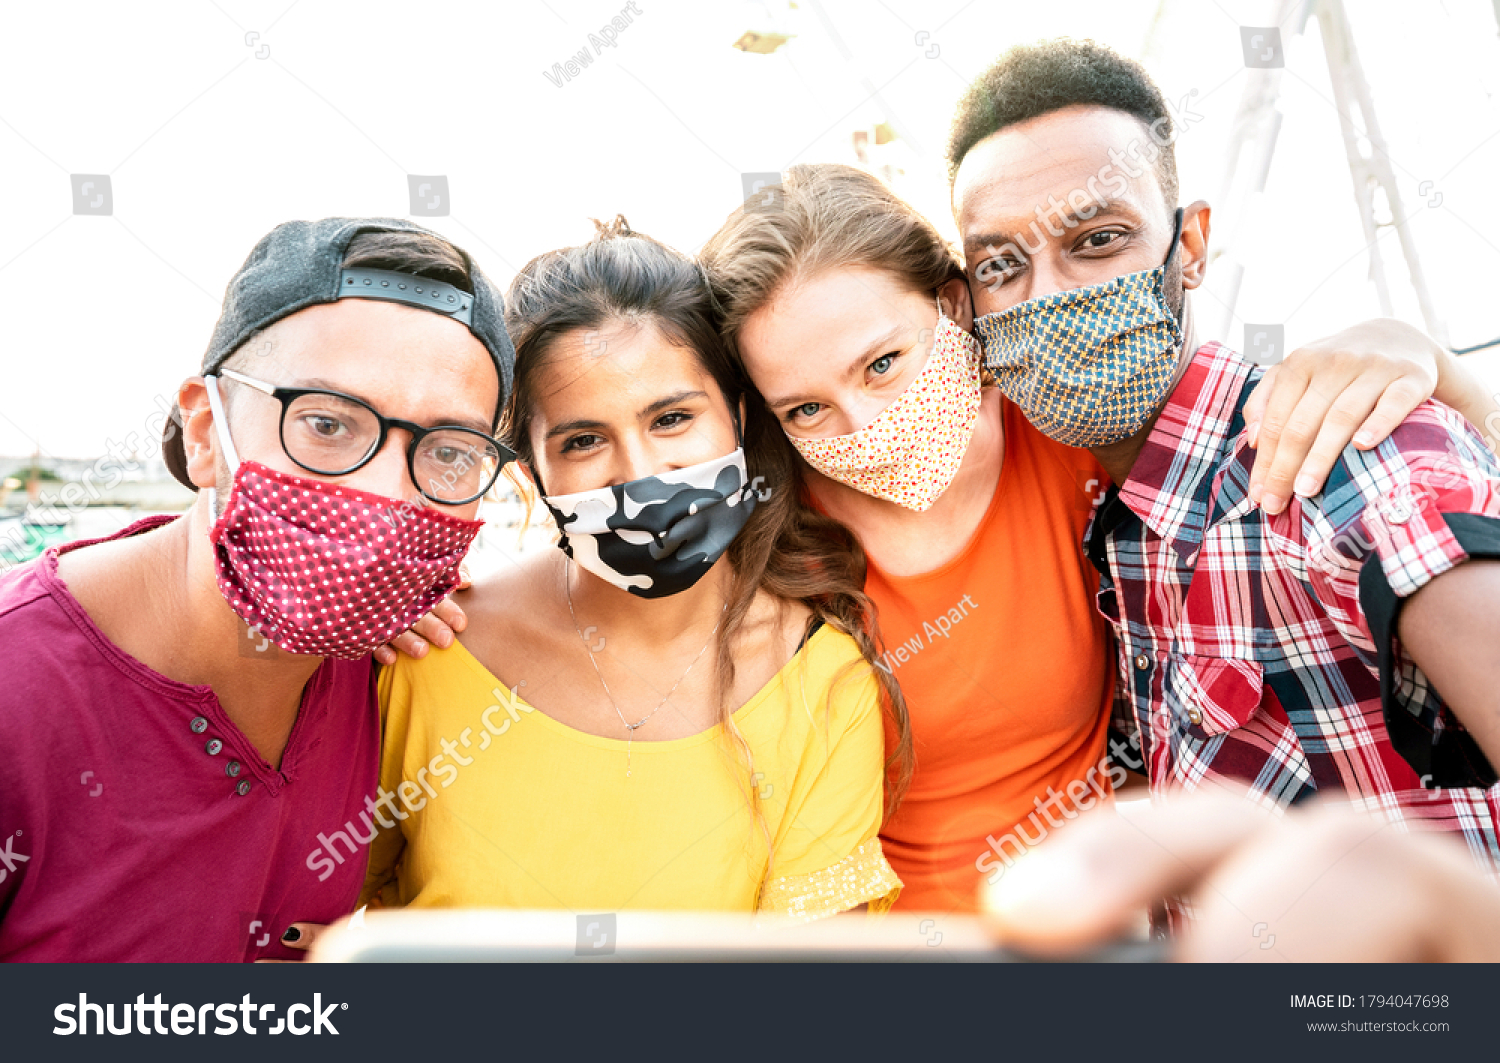 Multicultural milenial travelers taking selfie with closed face masks - New normal travel concept with young people having safe fun together at ferris wheel - Bright warm sunshine filter #1794047698